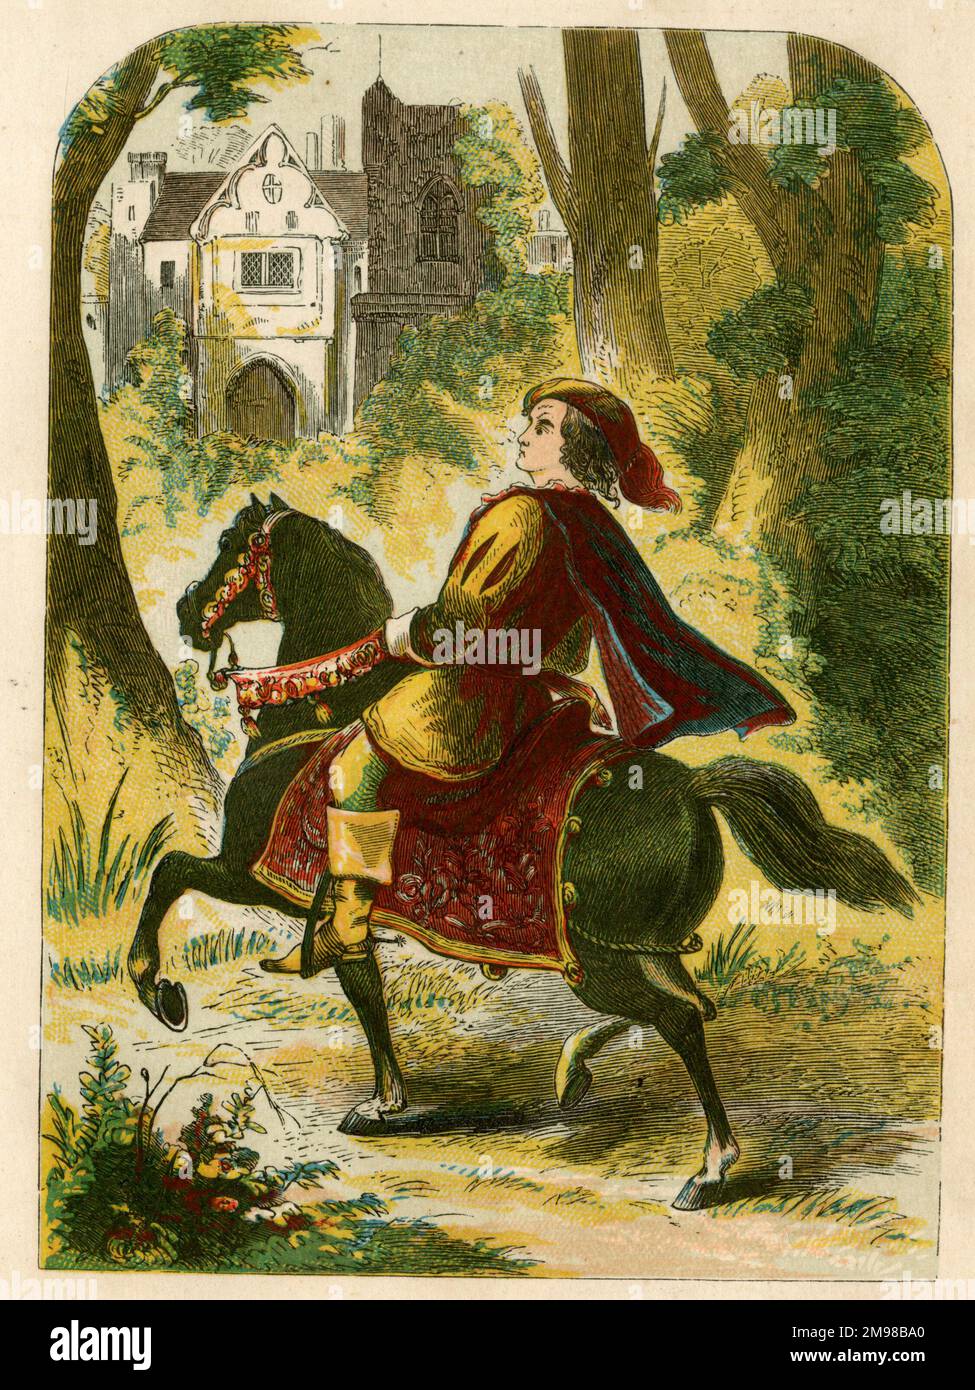 Perkin Warbeck (c.1474-1499) takes refuge at Beaulieu Abbey in the New Forest. By claiming to be Richard of Shrewsbury, Duke of York (the younger of the two Princes in the Tower), he was a threat to the Tudor monarchy under Henry VII. Stock Photo